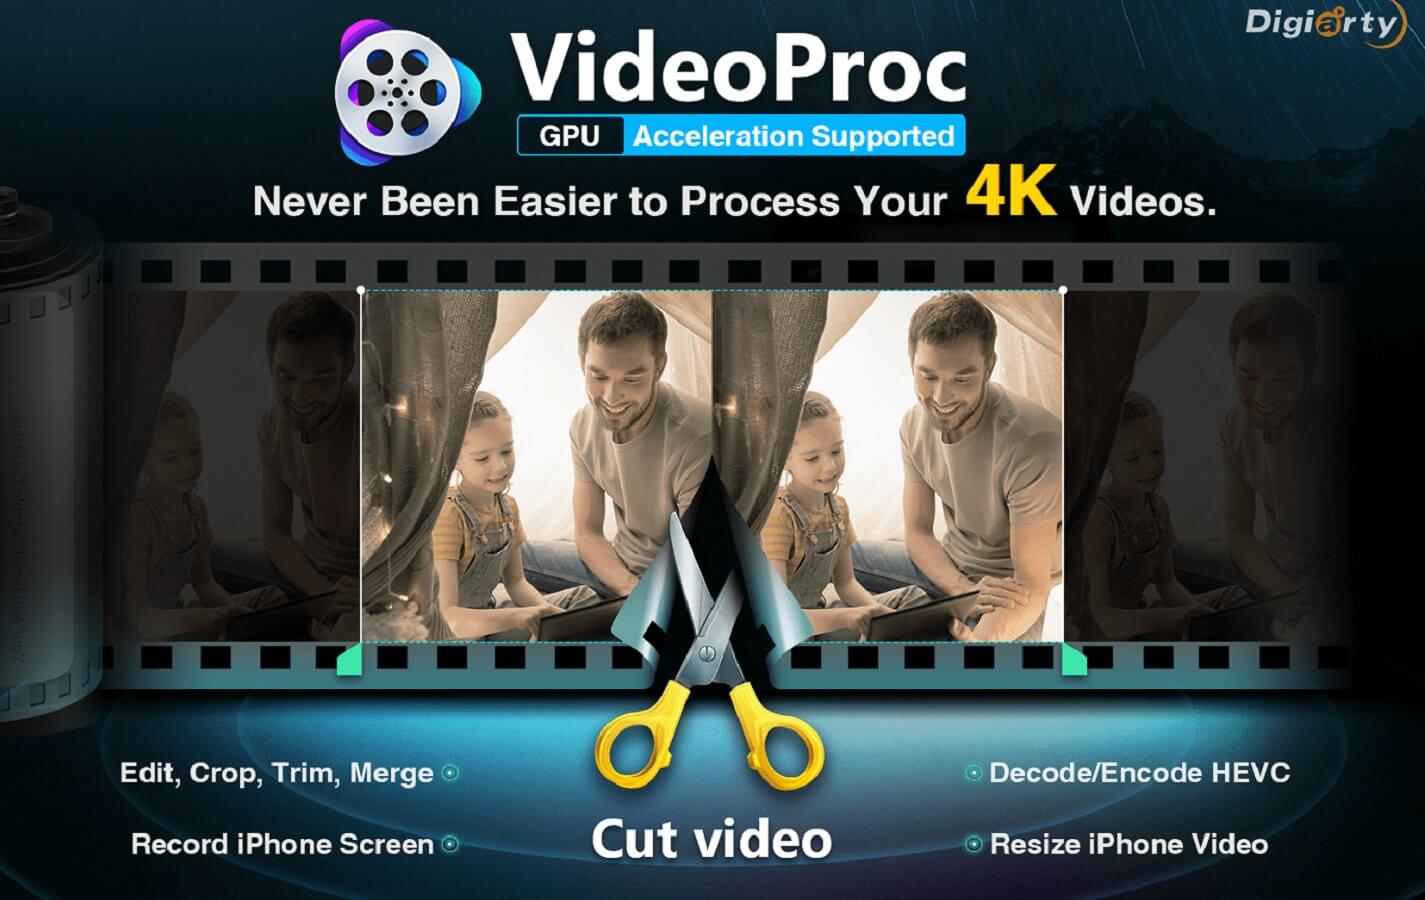 VideoProc – Fastest Tool to Process, Edit, Convert Videos Powered by GPU Acceleration